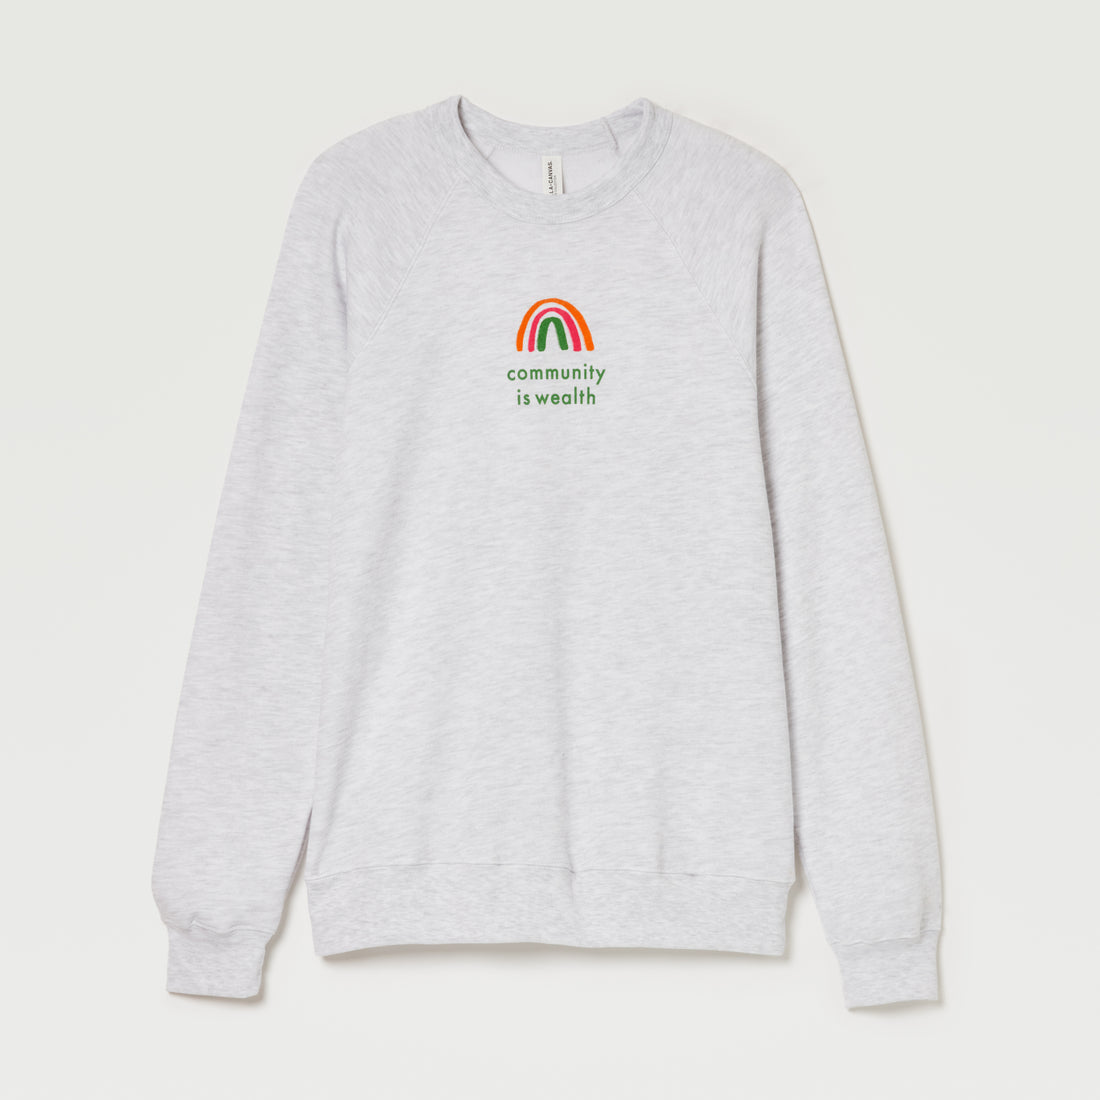 Community Is Wealth Sweatshirt by Gifted